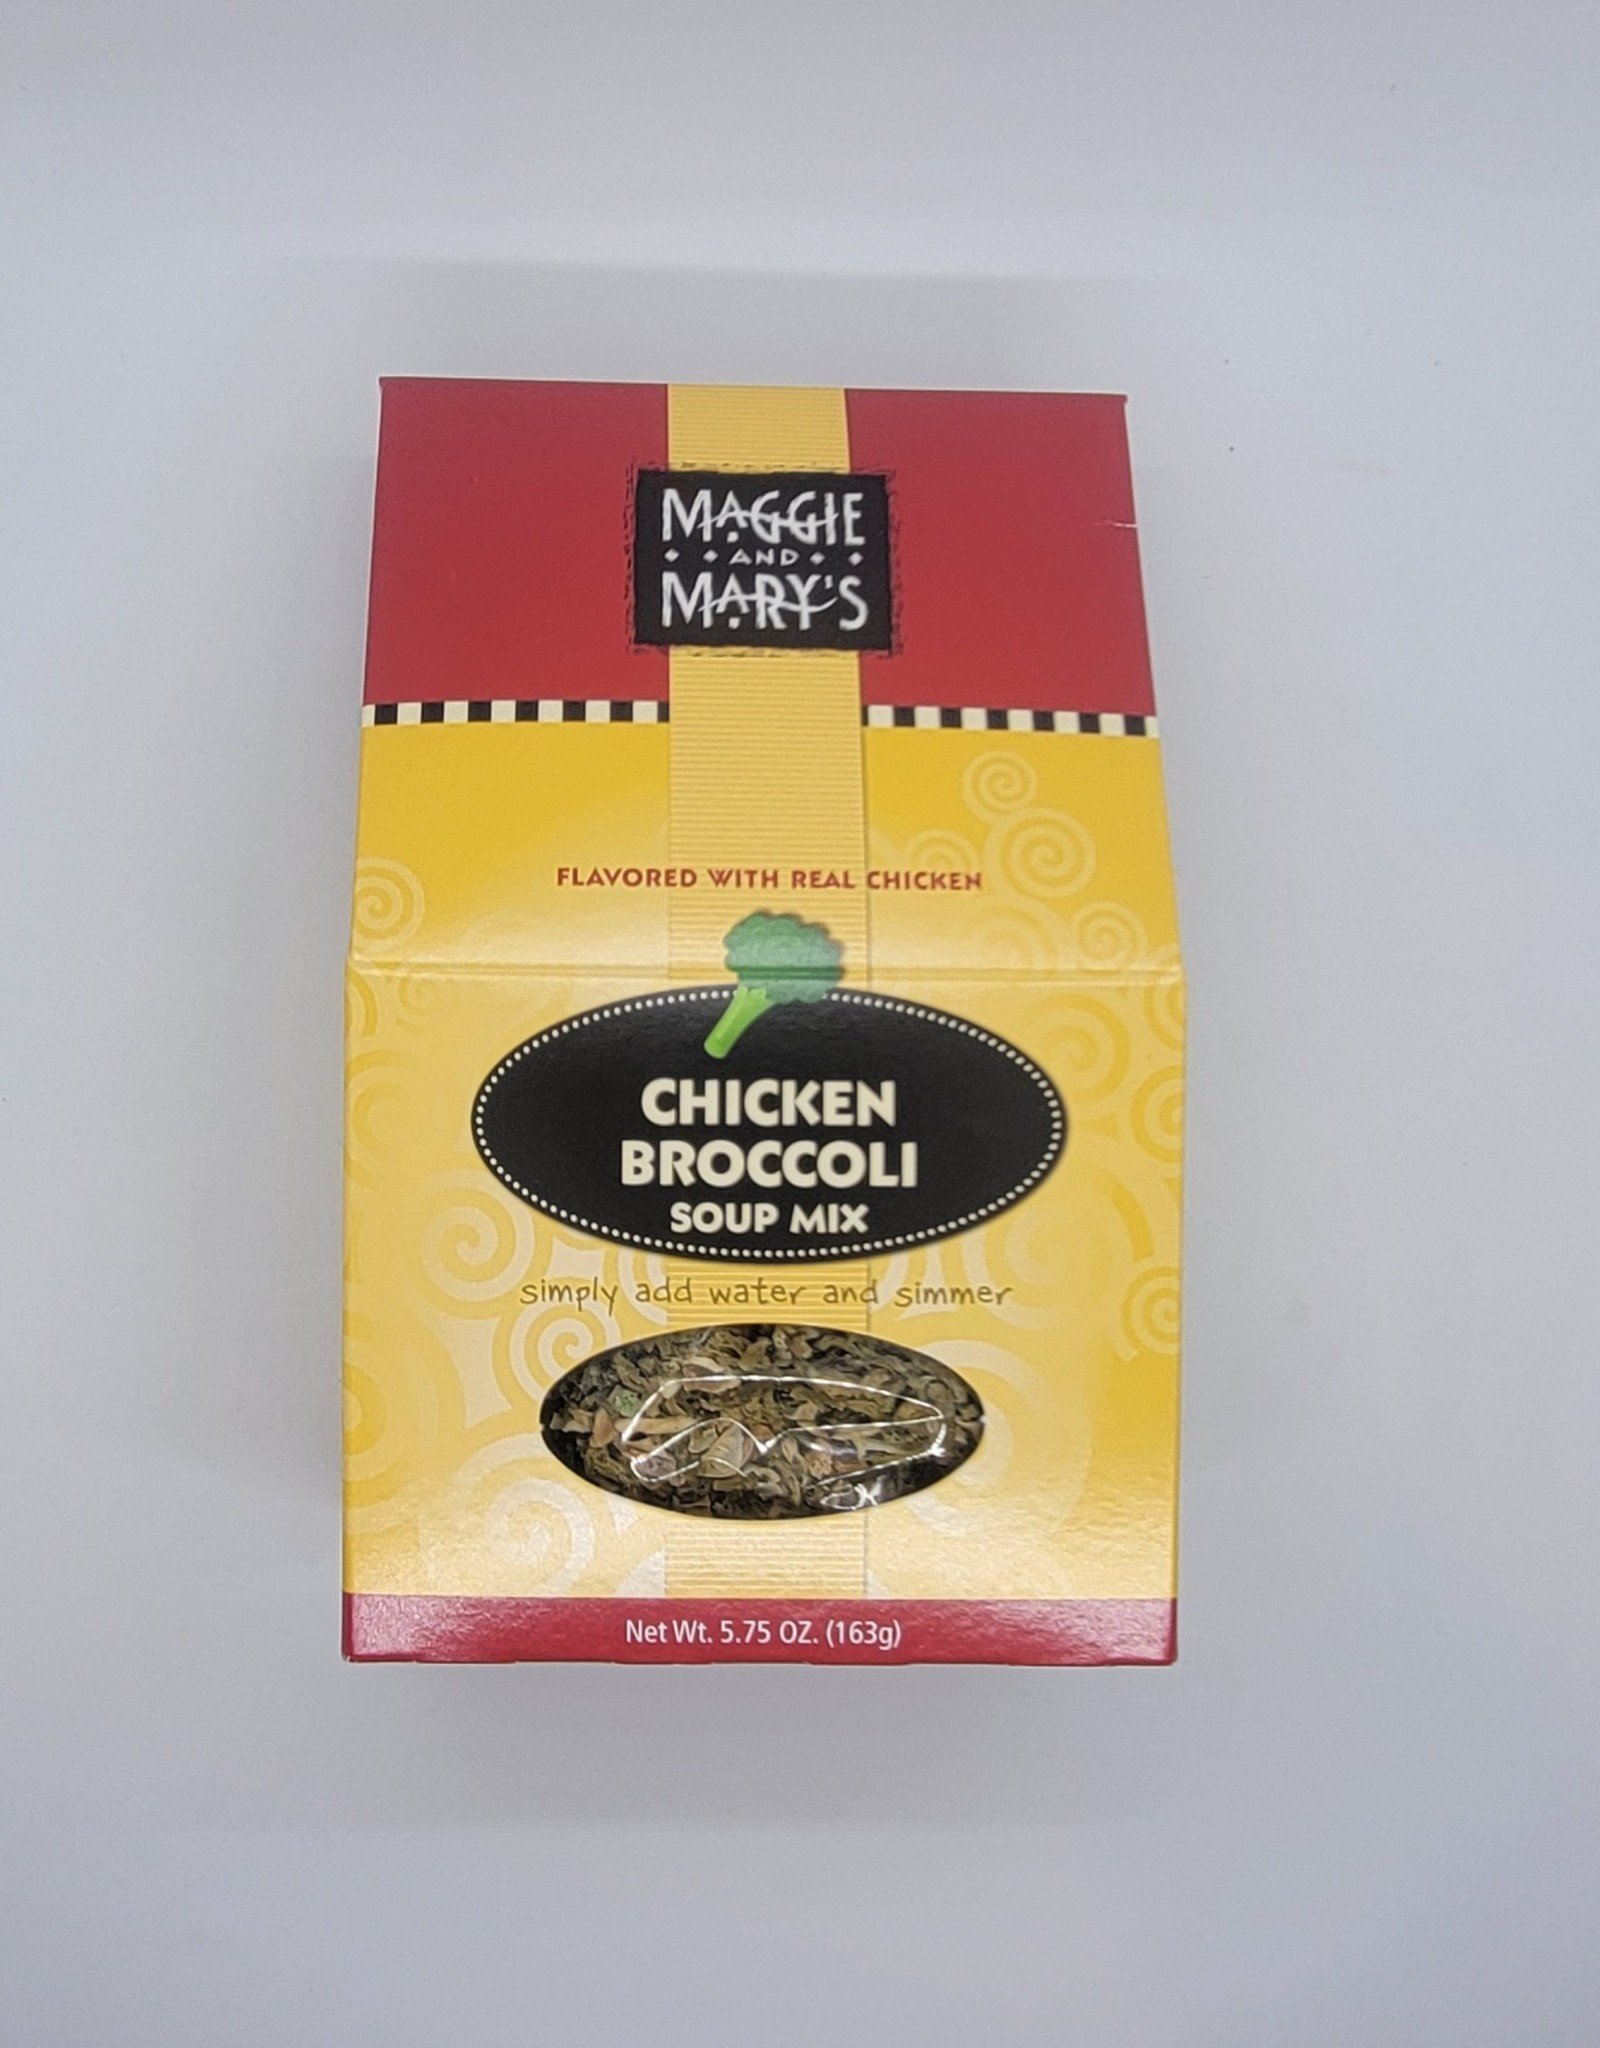 Maggie & Mary's Chicken Broccoli Soup Mix